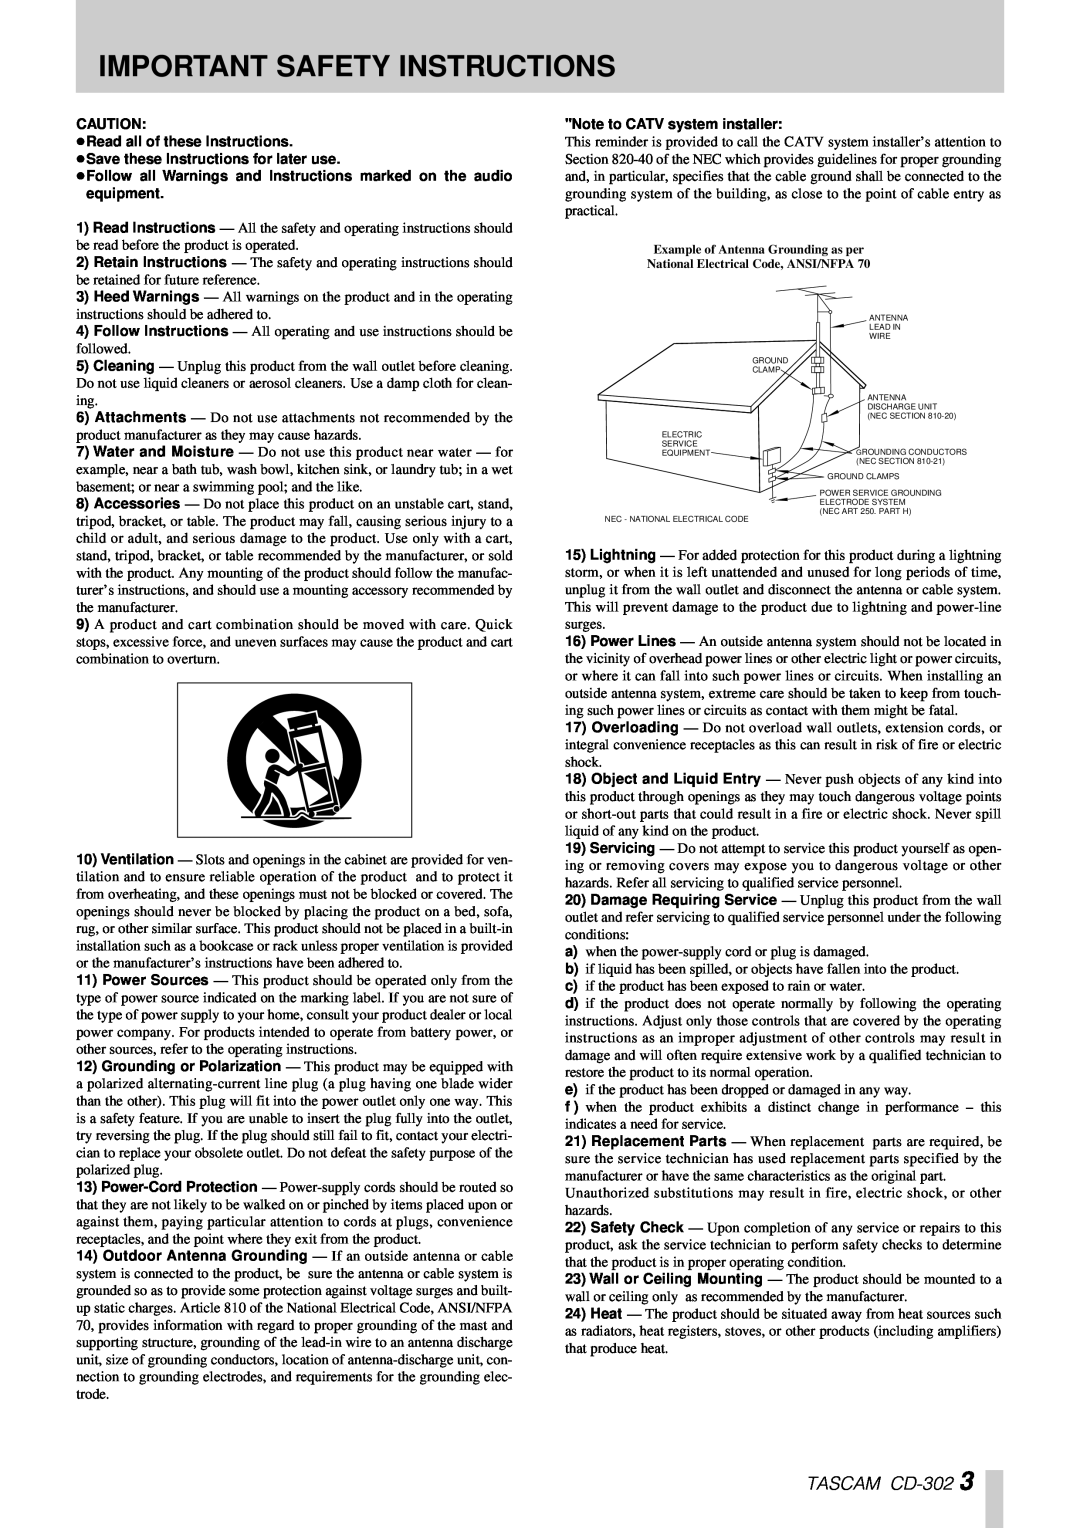 Tascam owner manual Important Safety Instructions, TASCAM CD-302 